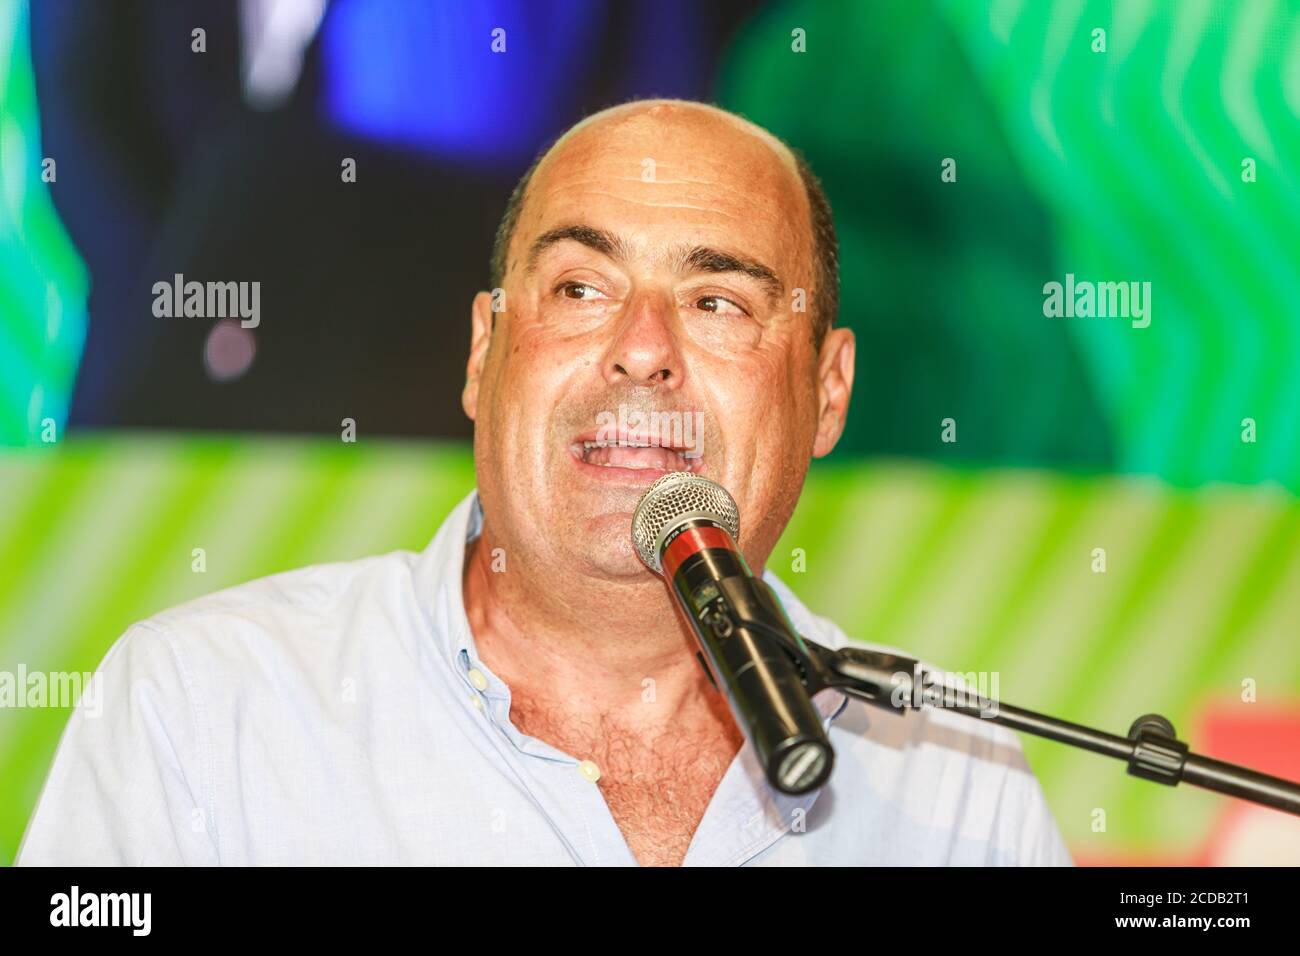 Bologna, ITALY. 27 August, 2020. Leader of the centre-left Democratic party PD Nicola Zingaretti during opening speech of “Fest'Unità” (Democratic party event) on August 27, 2020 in Bologna, Italy. Credit: Massimiliano Donati/Alamy Live News Stock Photo